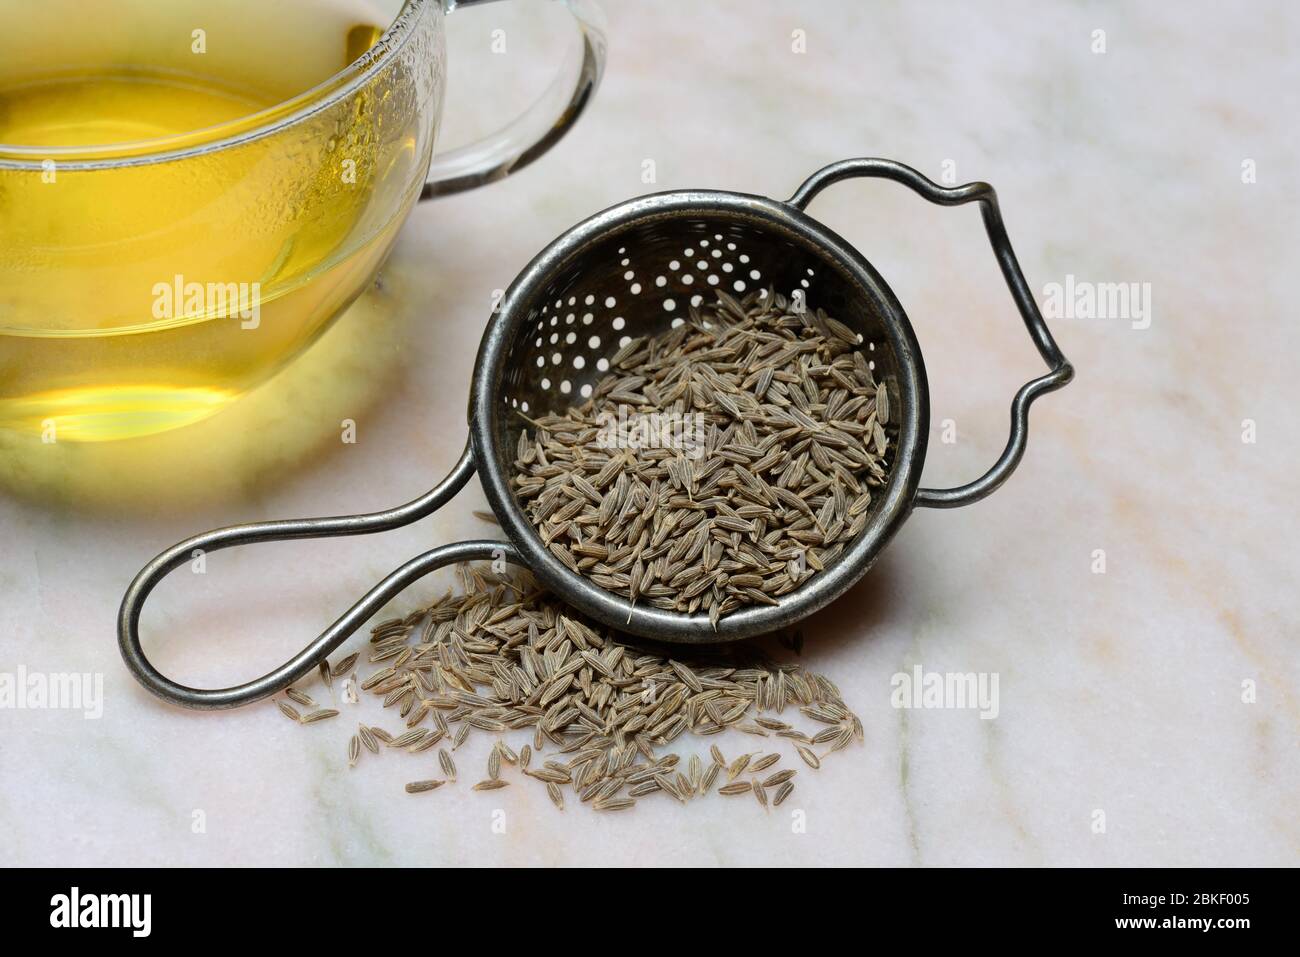 Caraway seeds in tea strainer and cup of caraway tea, food photography, studio shot, Germany Stock Photo